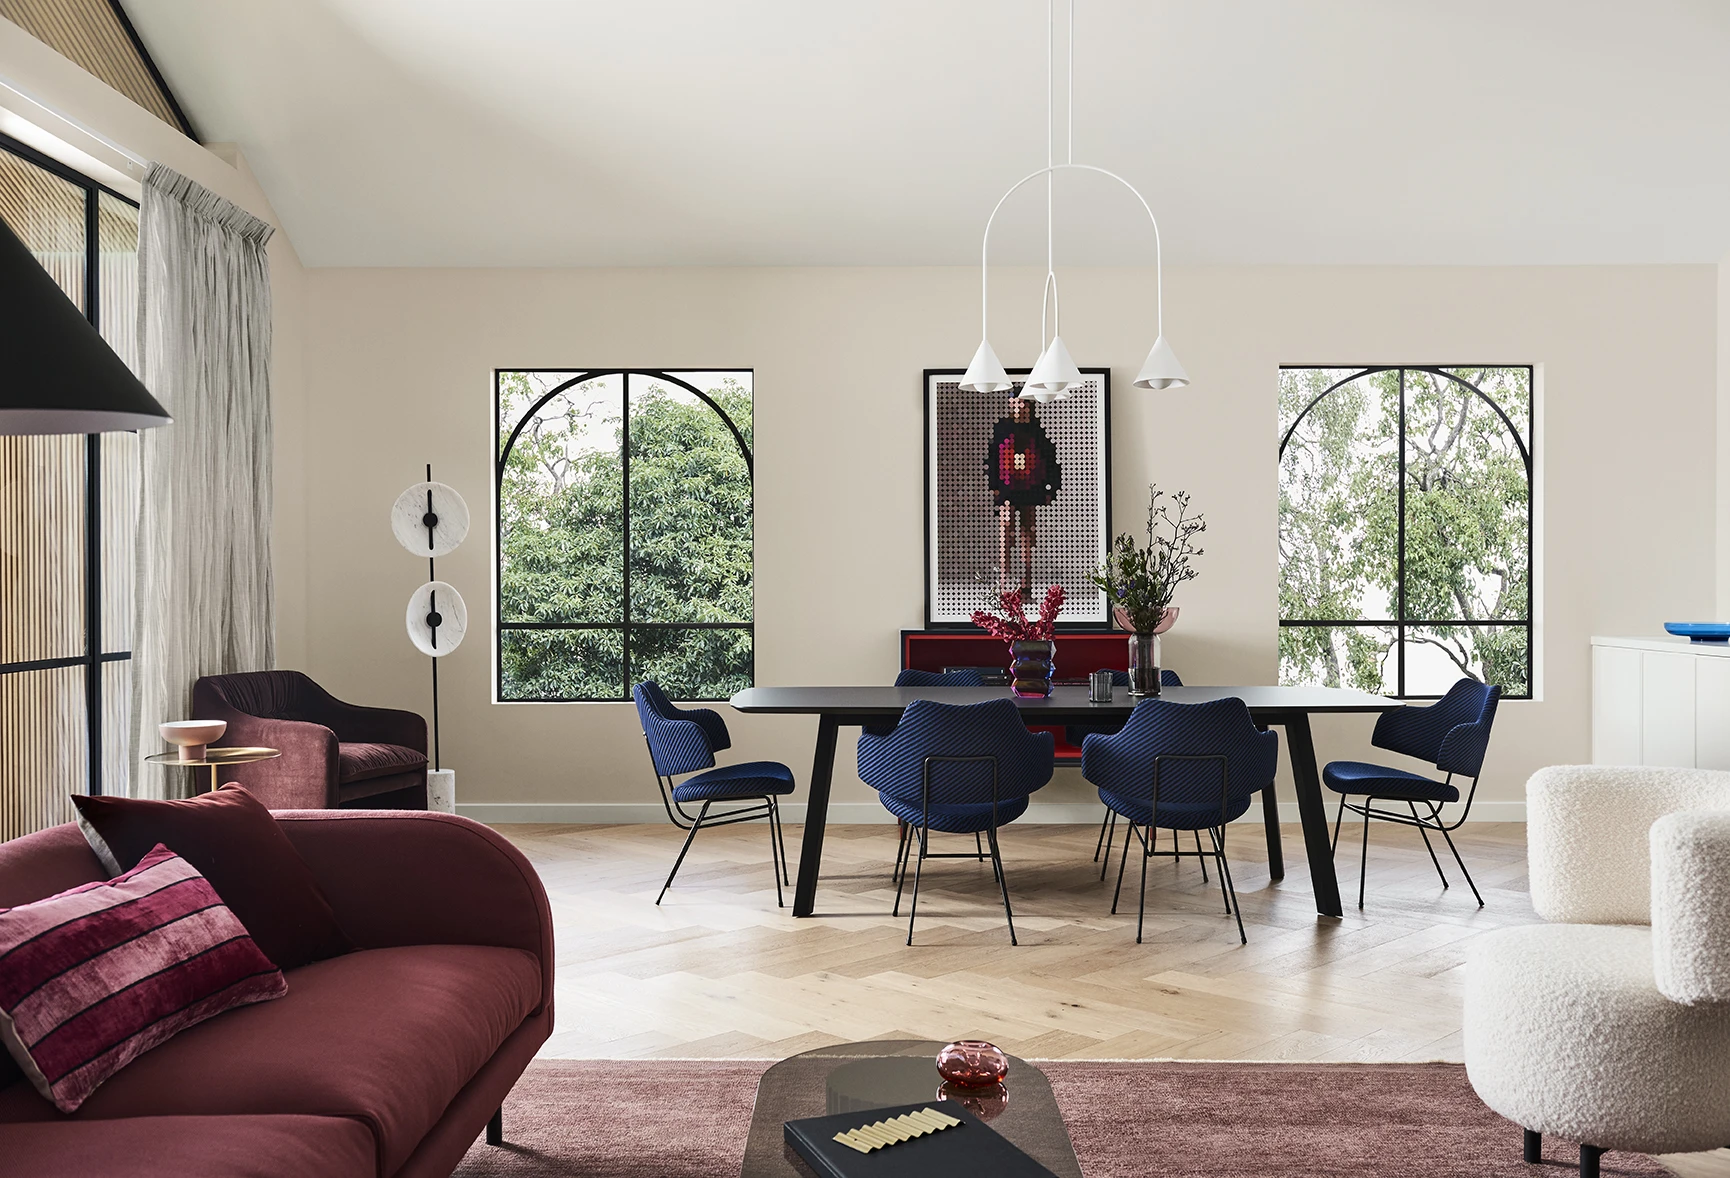 Spacious dining room with rich navy blue chairs and a deep burgundy lounge